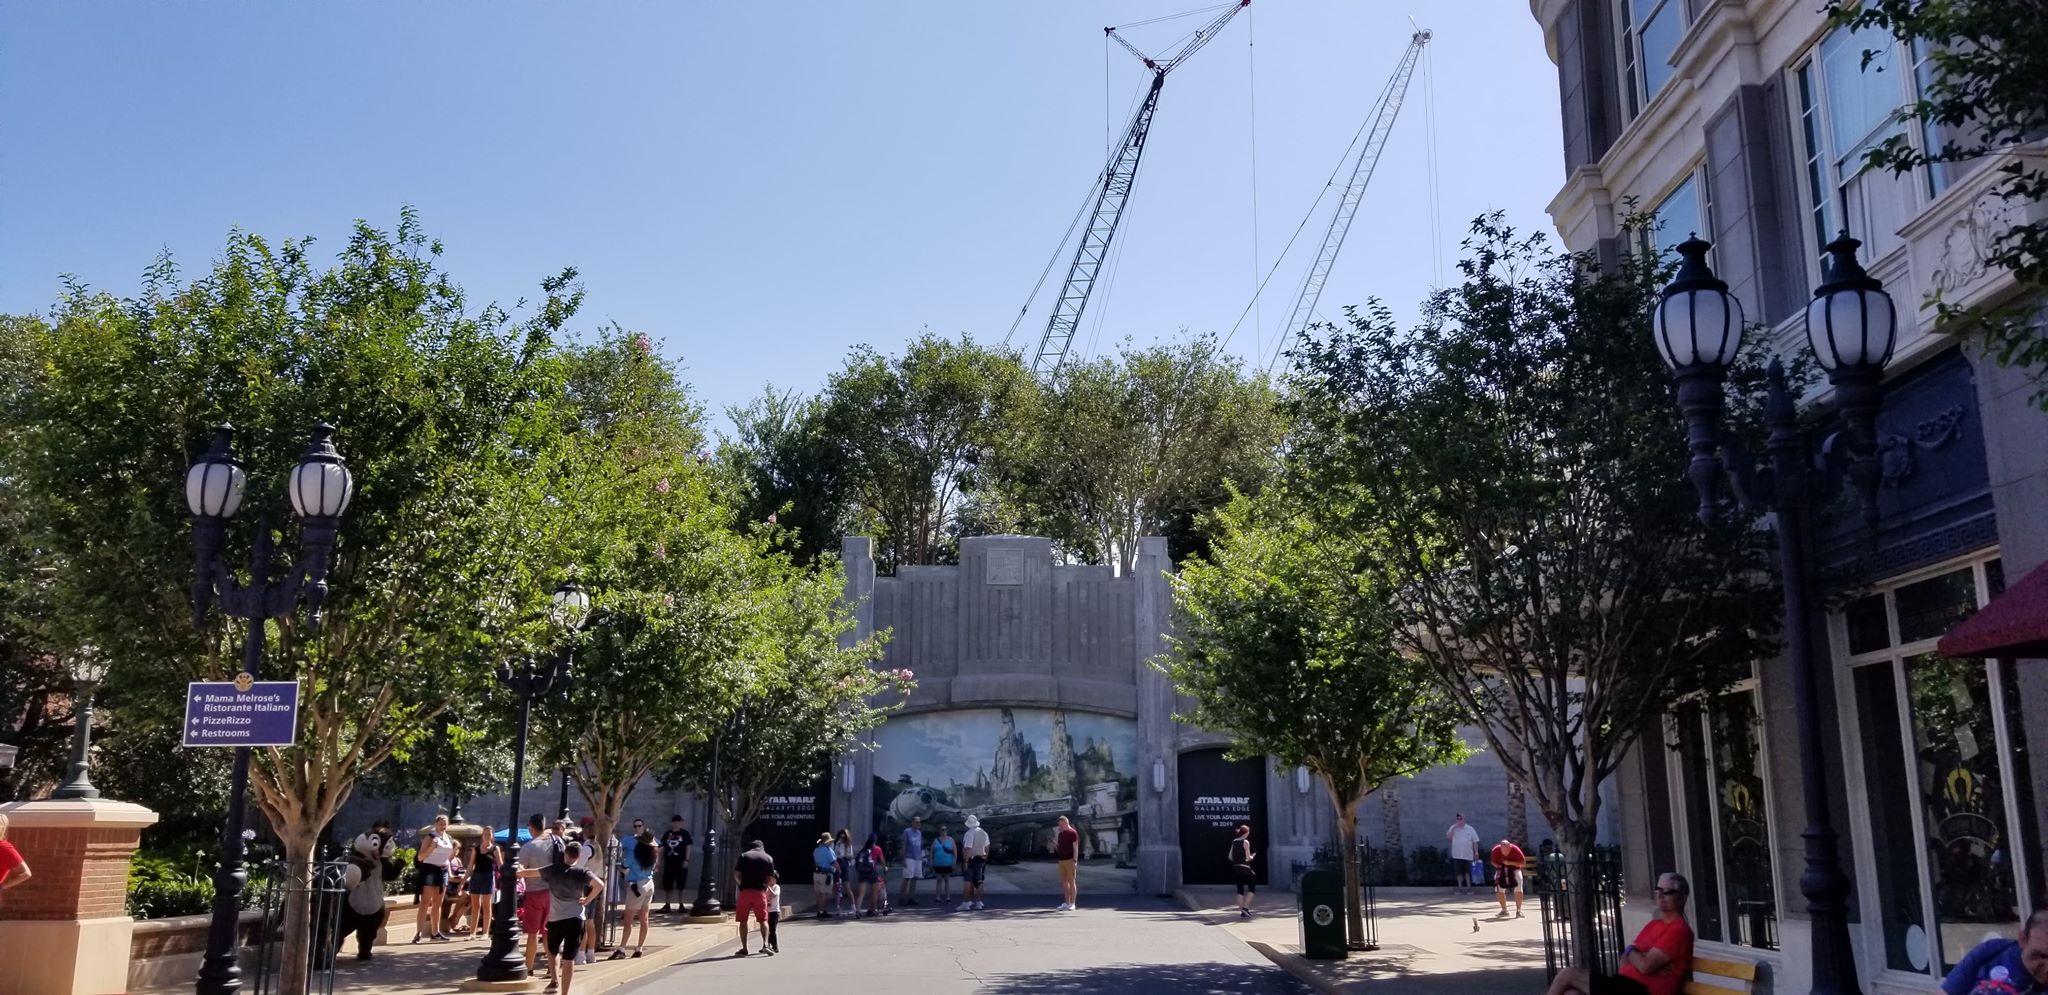 PHOTOS: New Foliage Installed at Star Wars: Galaxy’s Edge in Hollywood Studios